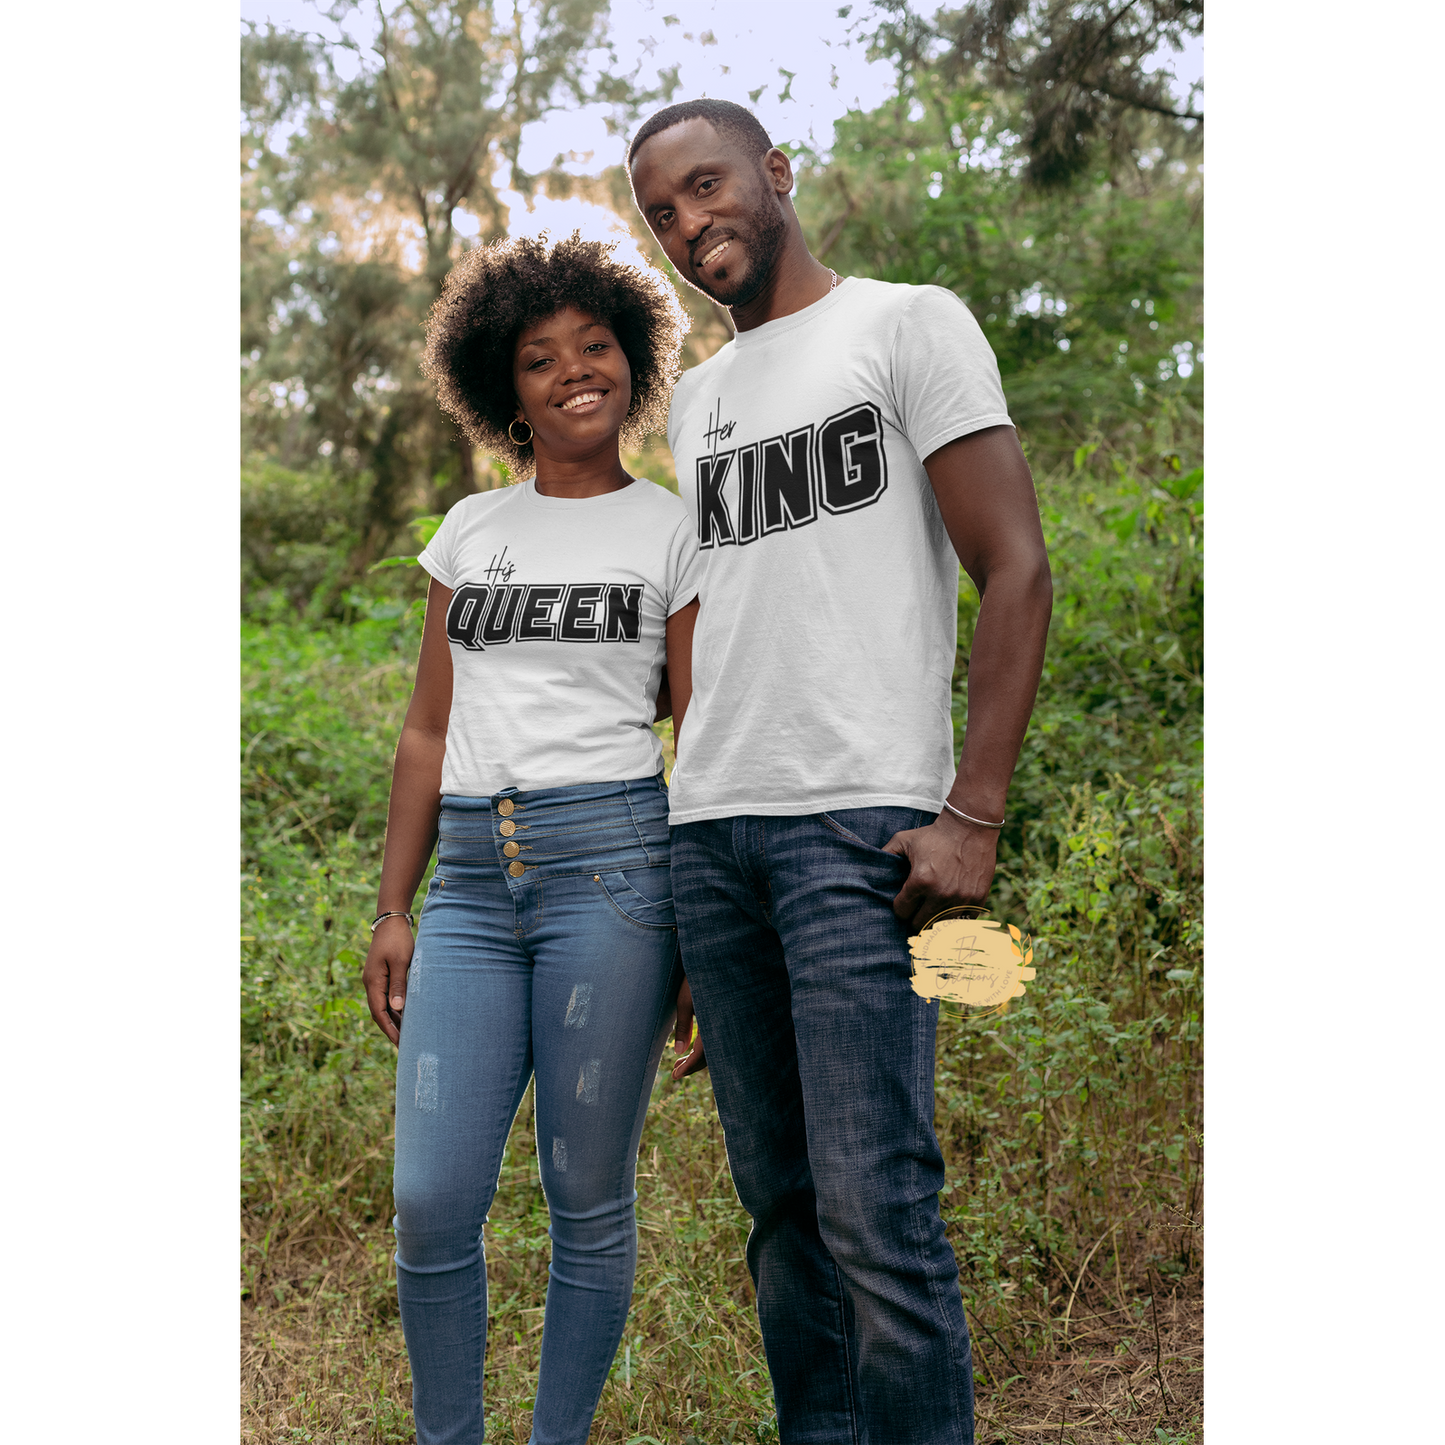 His Queen | Her King | Couples Shirts | T-Shirts - Eb Creations His Queen | Her King | Couples Shirts | T-Shirts